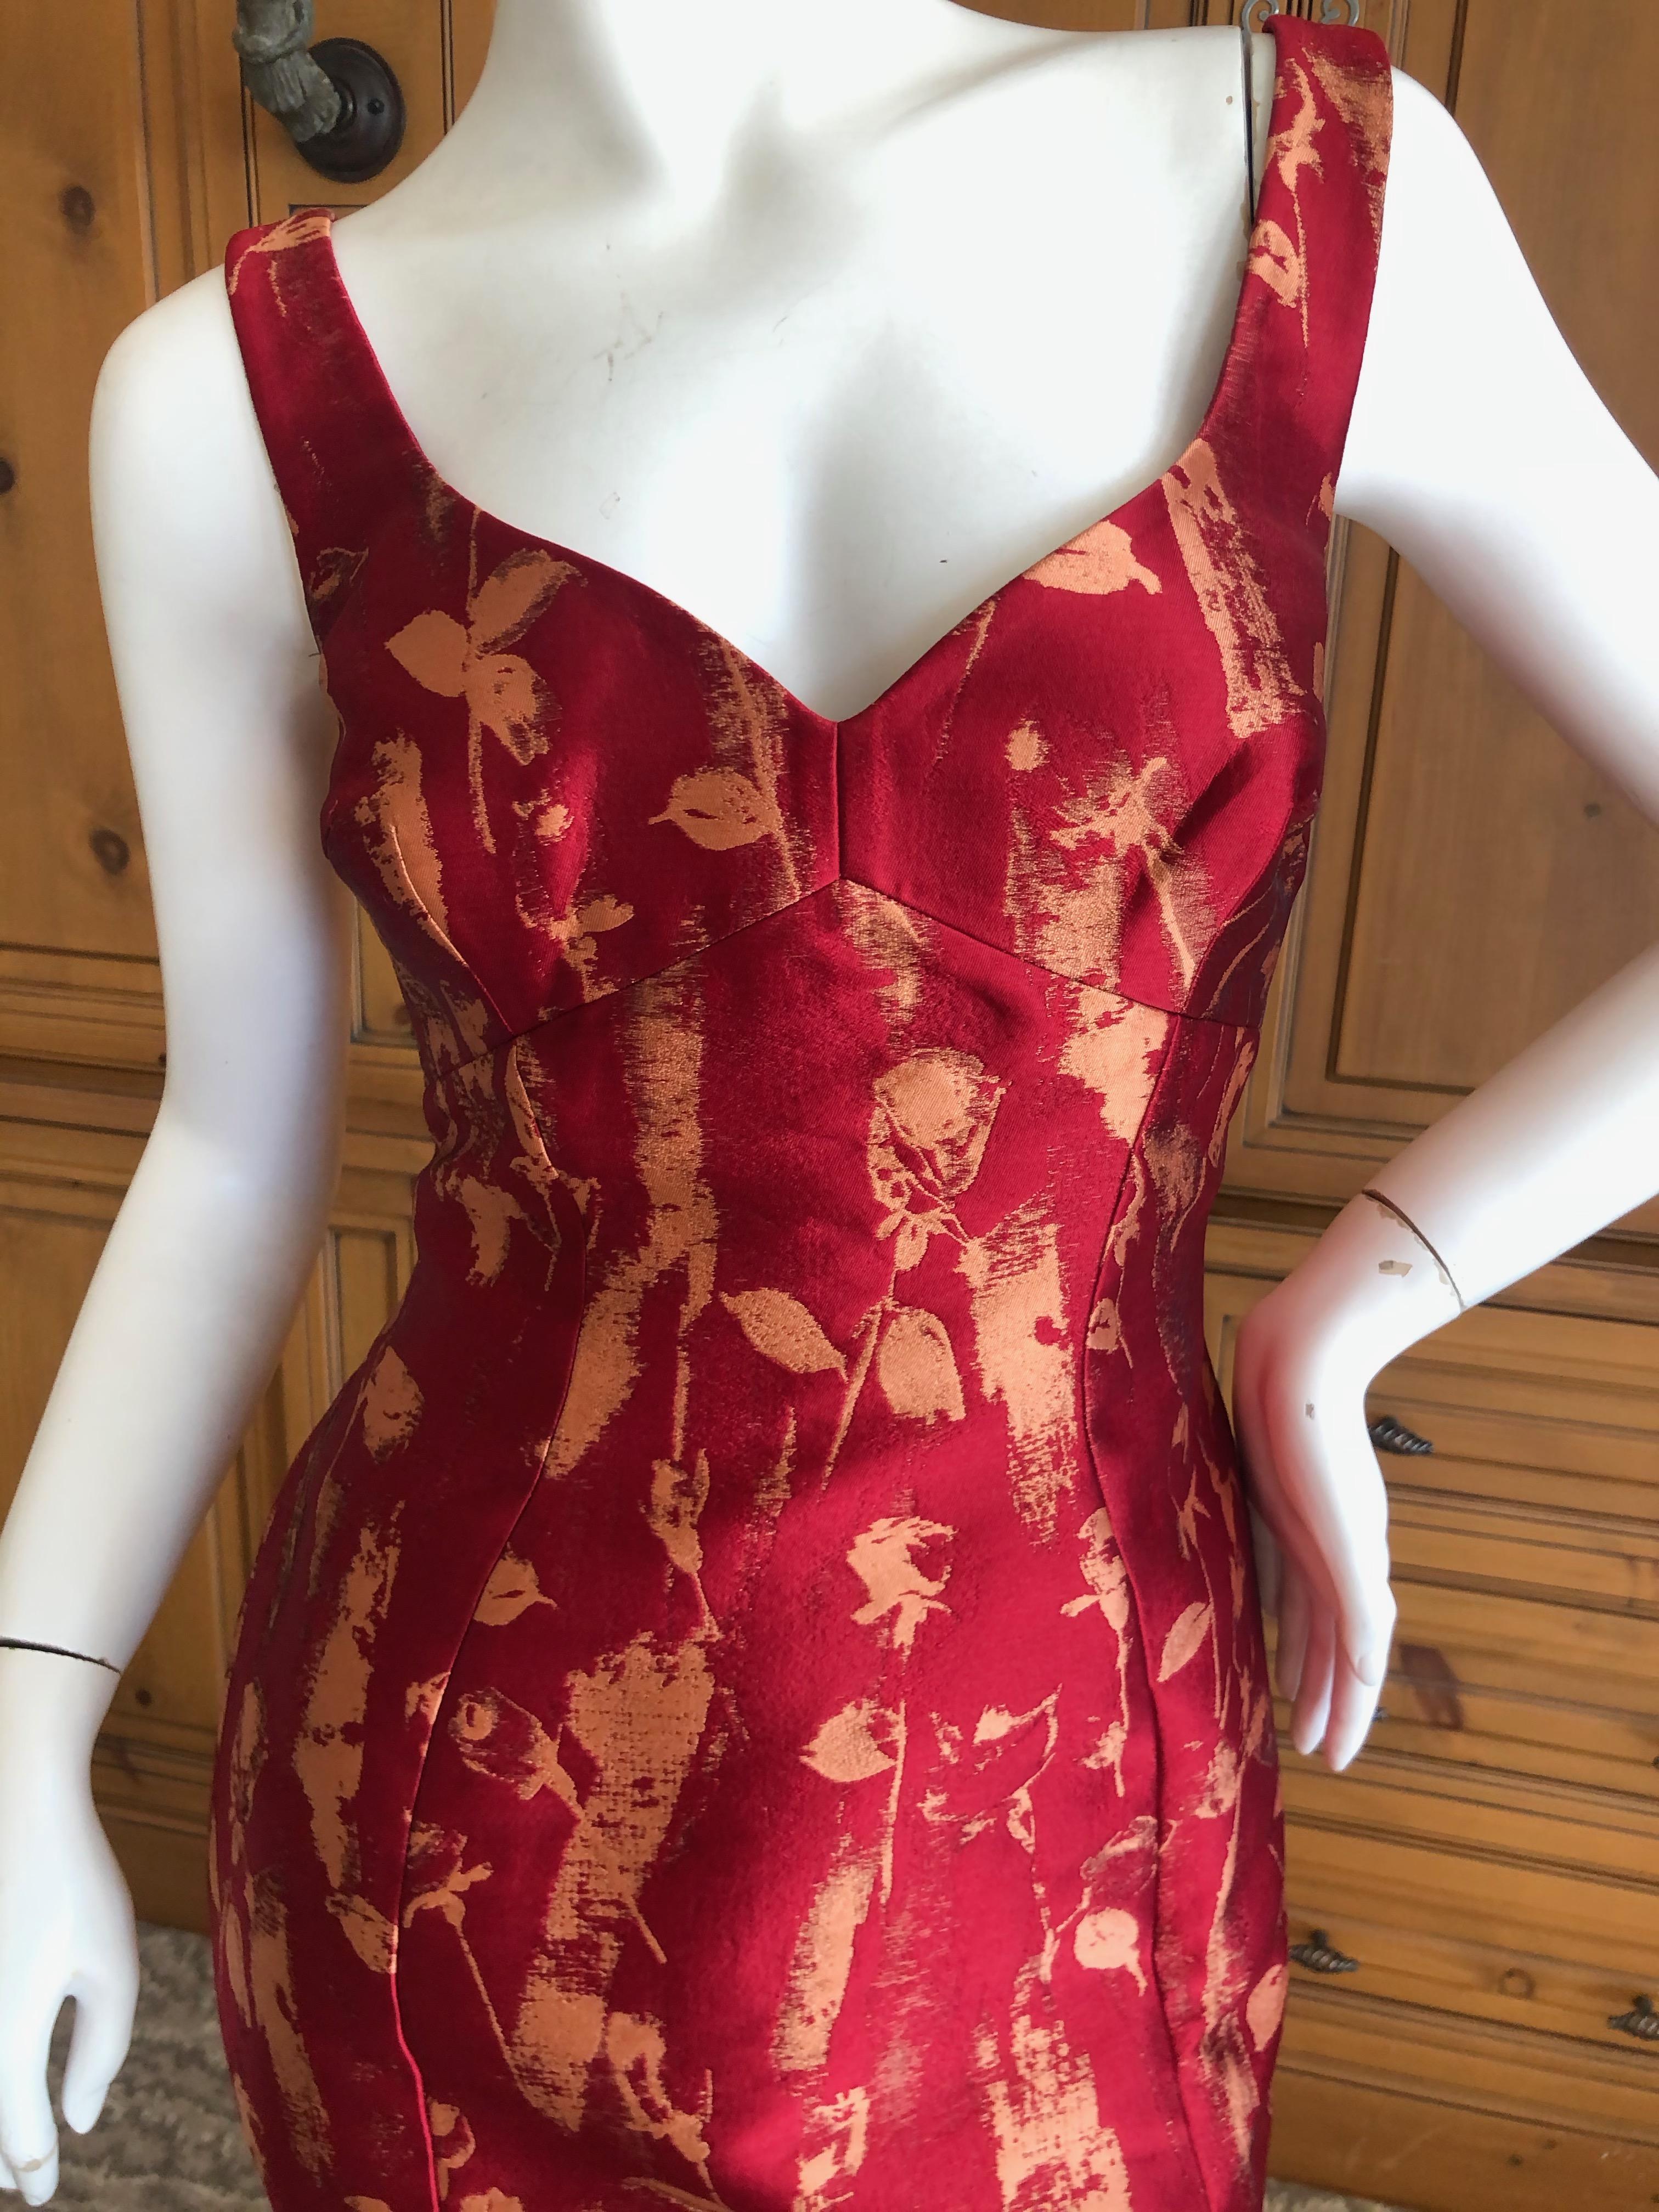 Vivienne Westwood Red and Gold Tulip Print Brocade Cocktail Dress In Excellent Condition For Sale In Cloverdale, CA